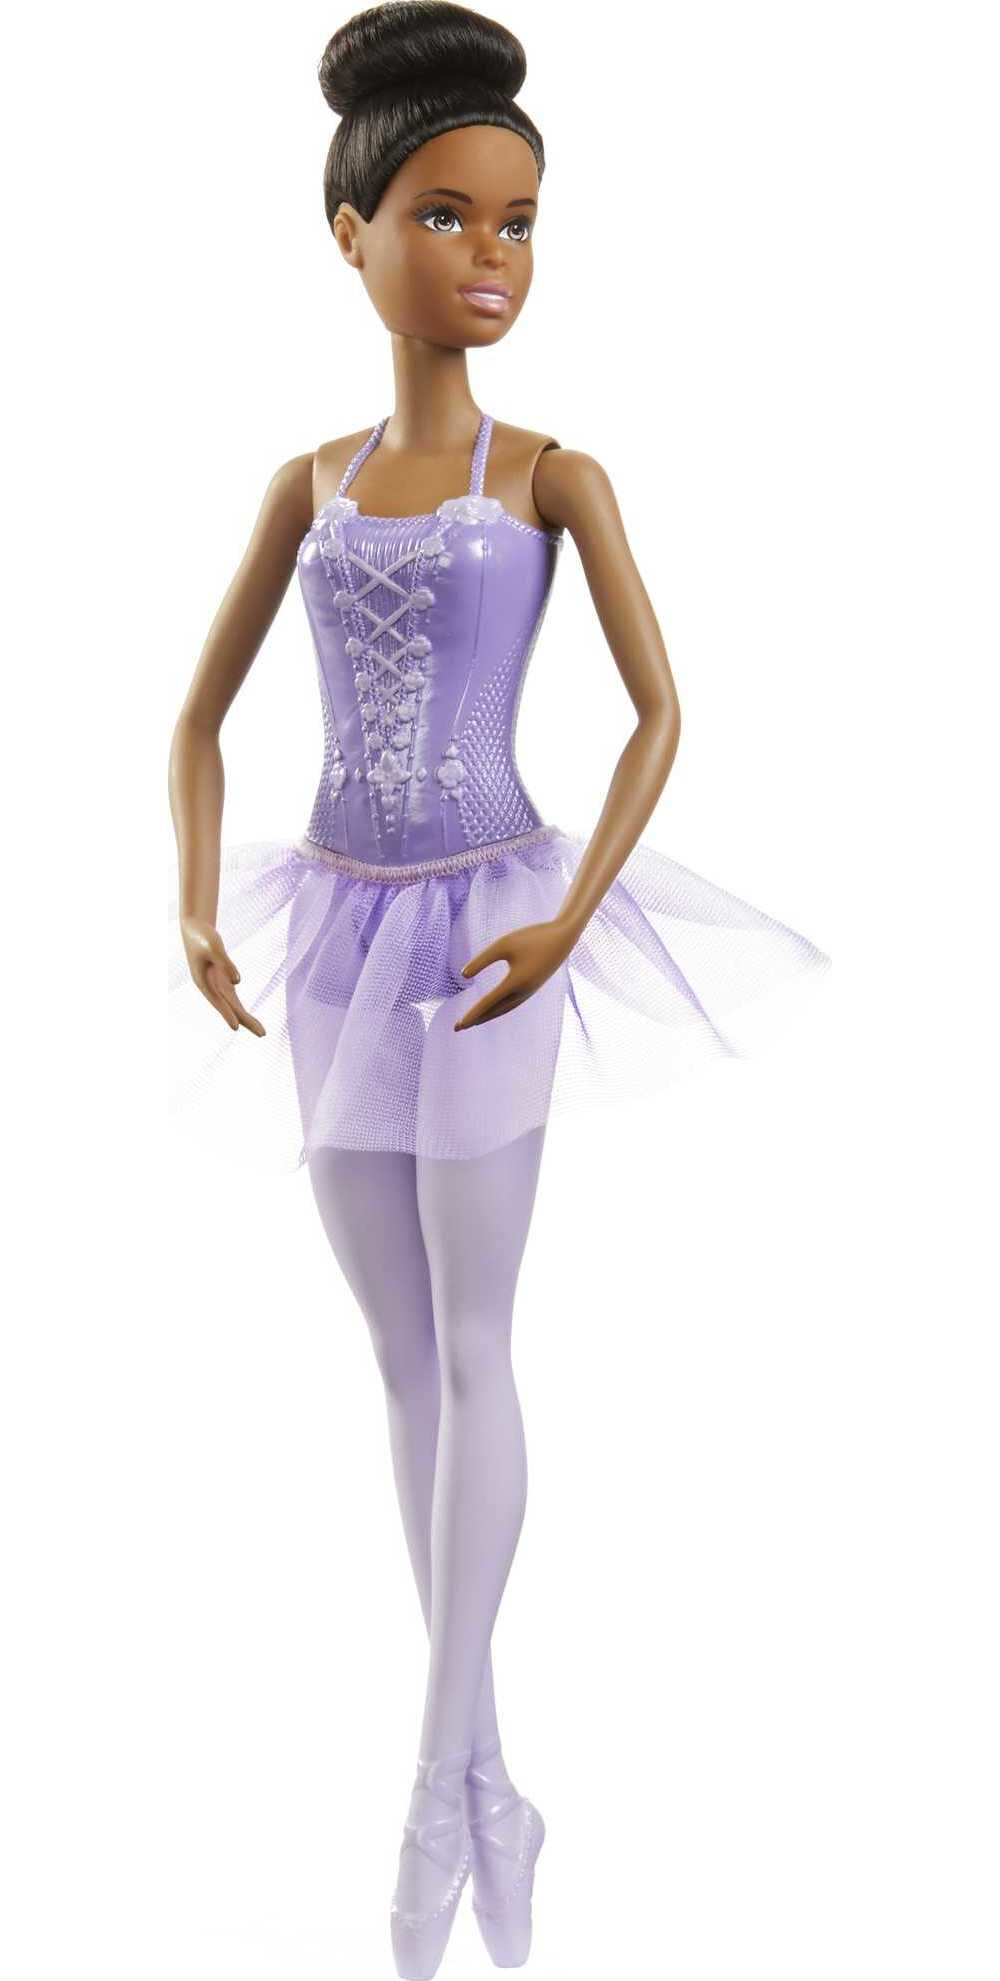 Barbie Ballerina Doll in Purple Tutu with Black Hair, Brown Eyes, Ballet Arms & Sculpted Toe Shoes - image 1 of 6